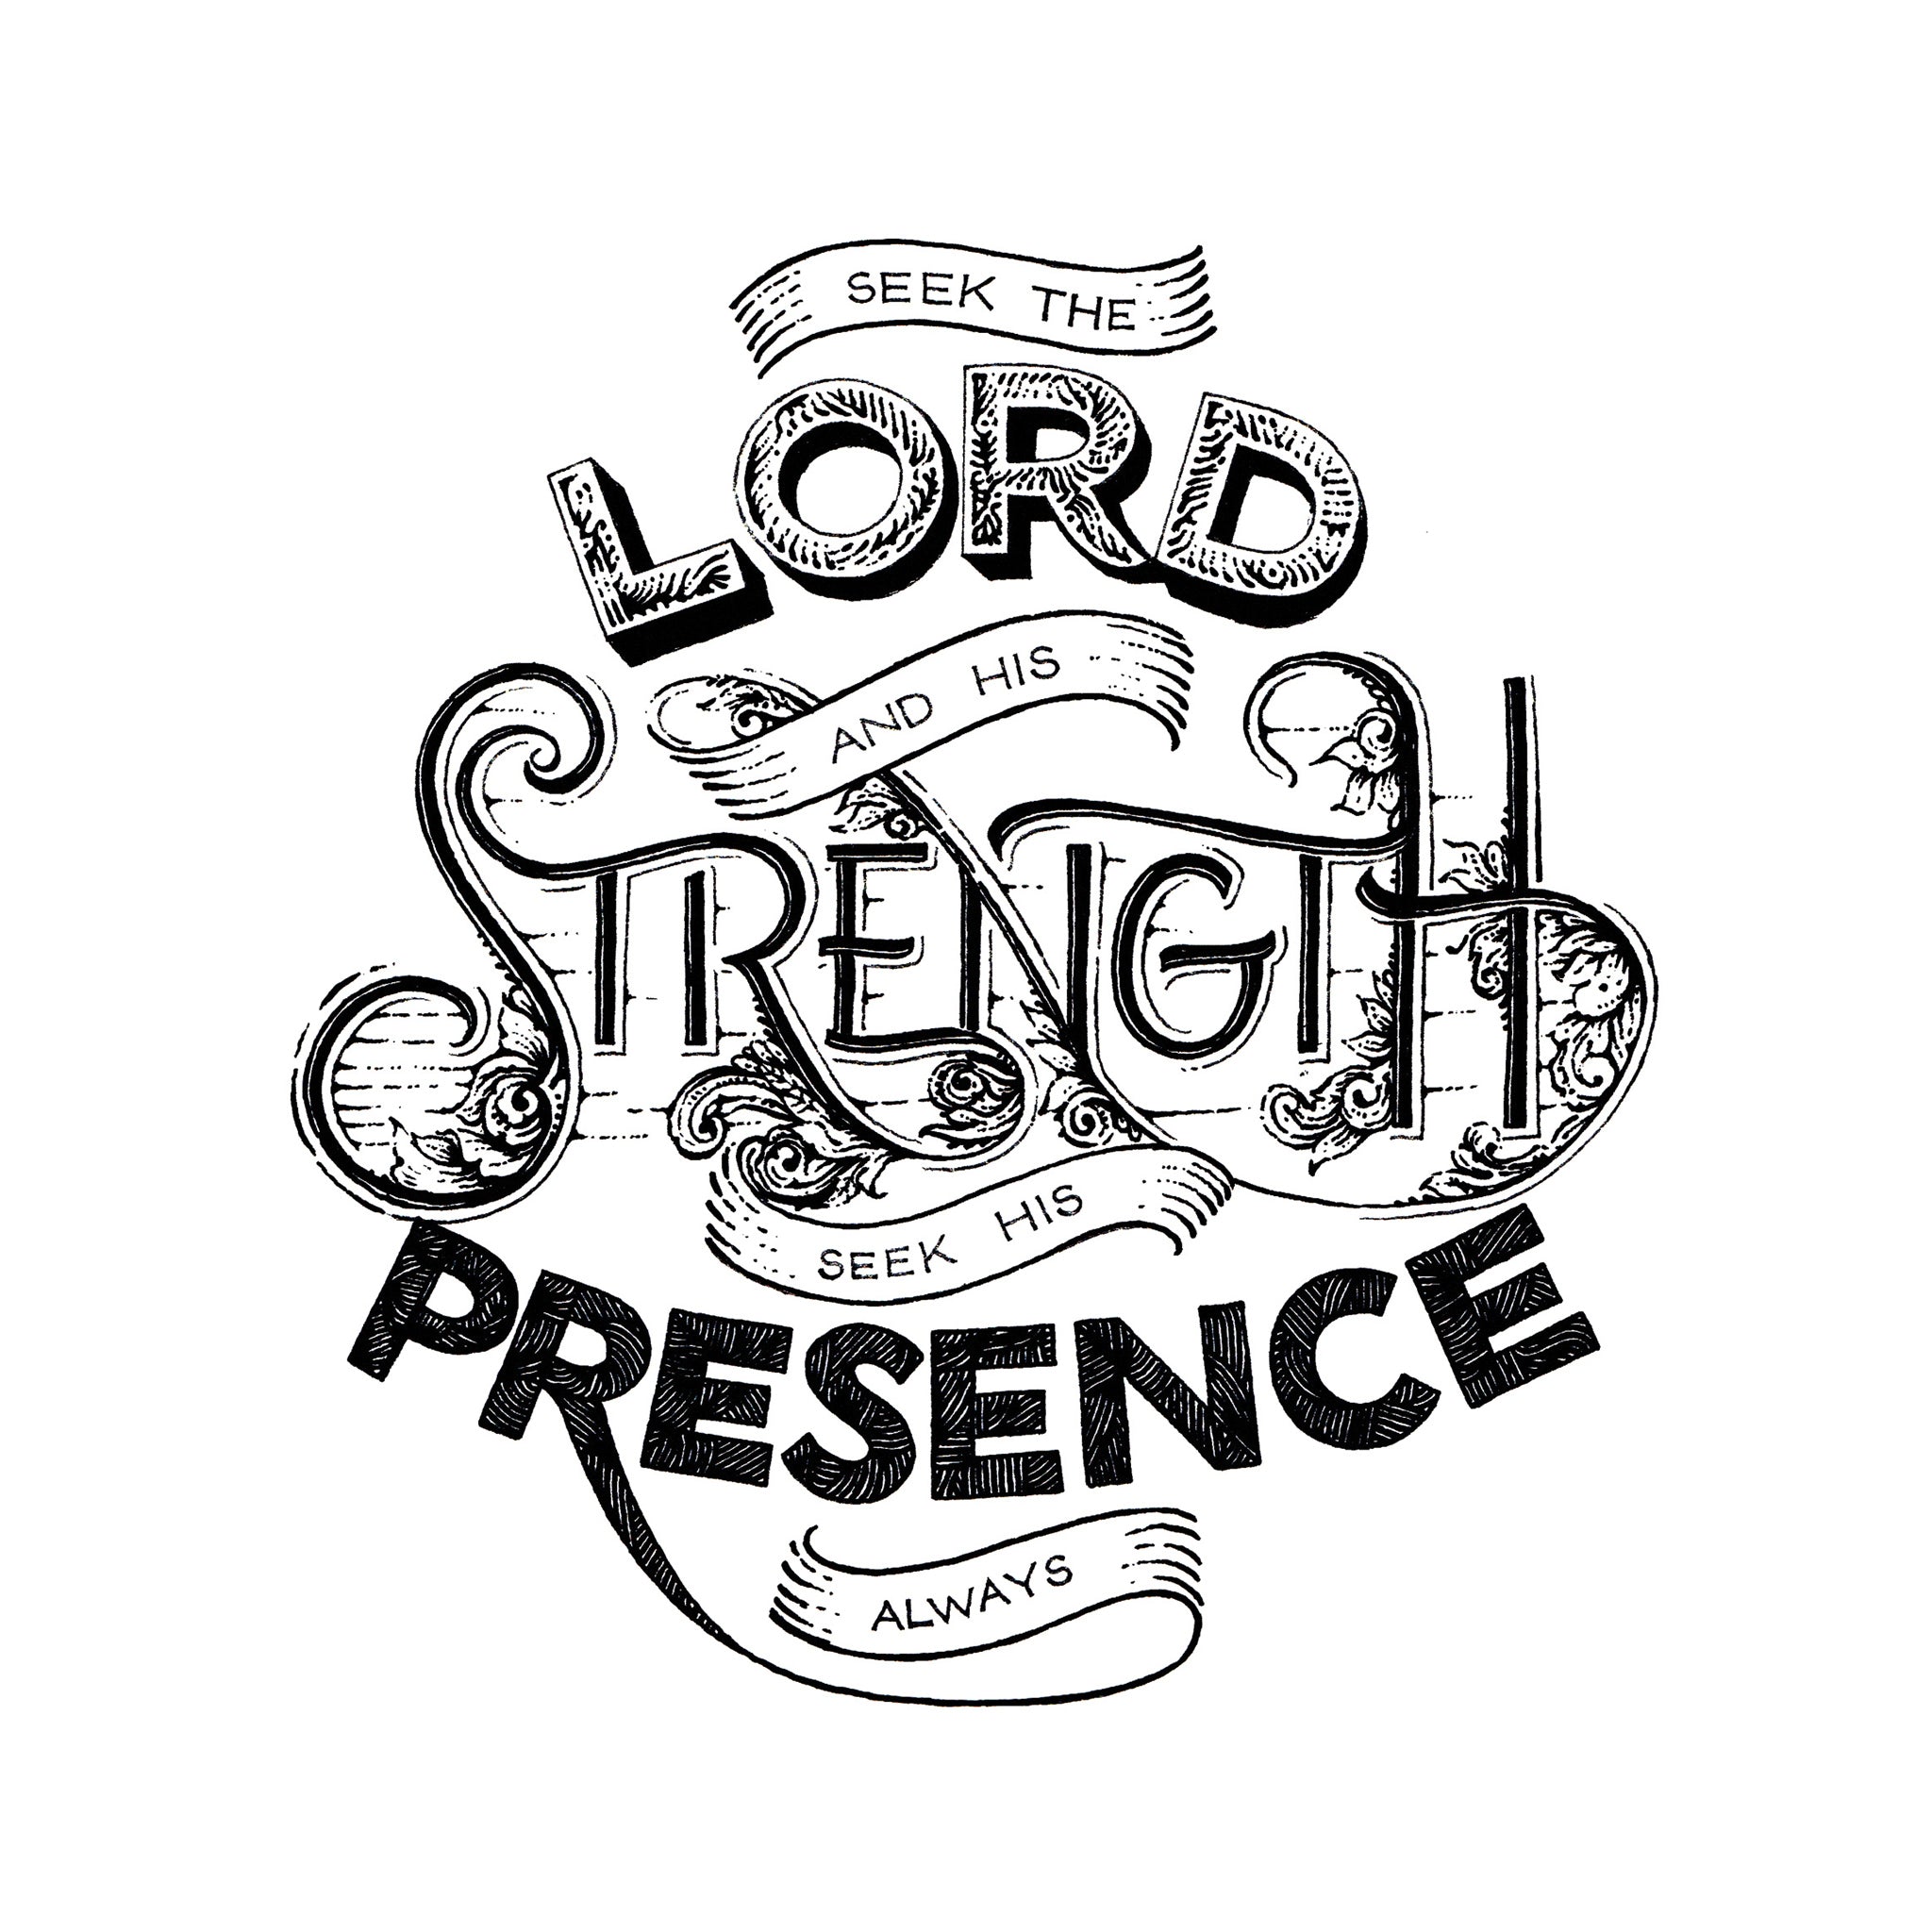 Seek the Lord and His Strength - Psalm 105:4 art print - A4 handlettering